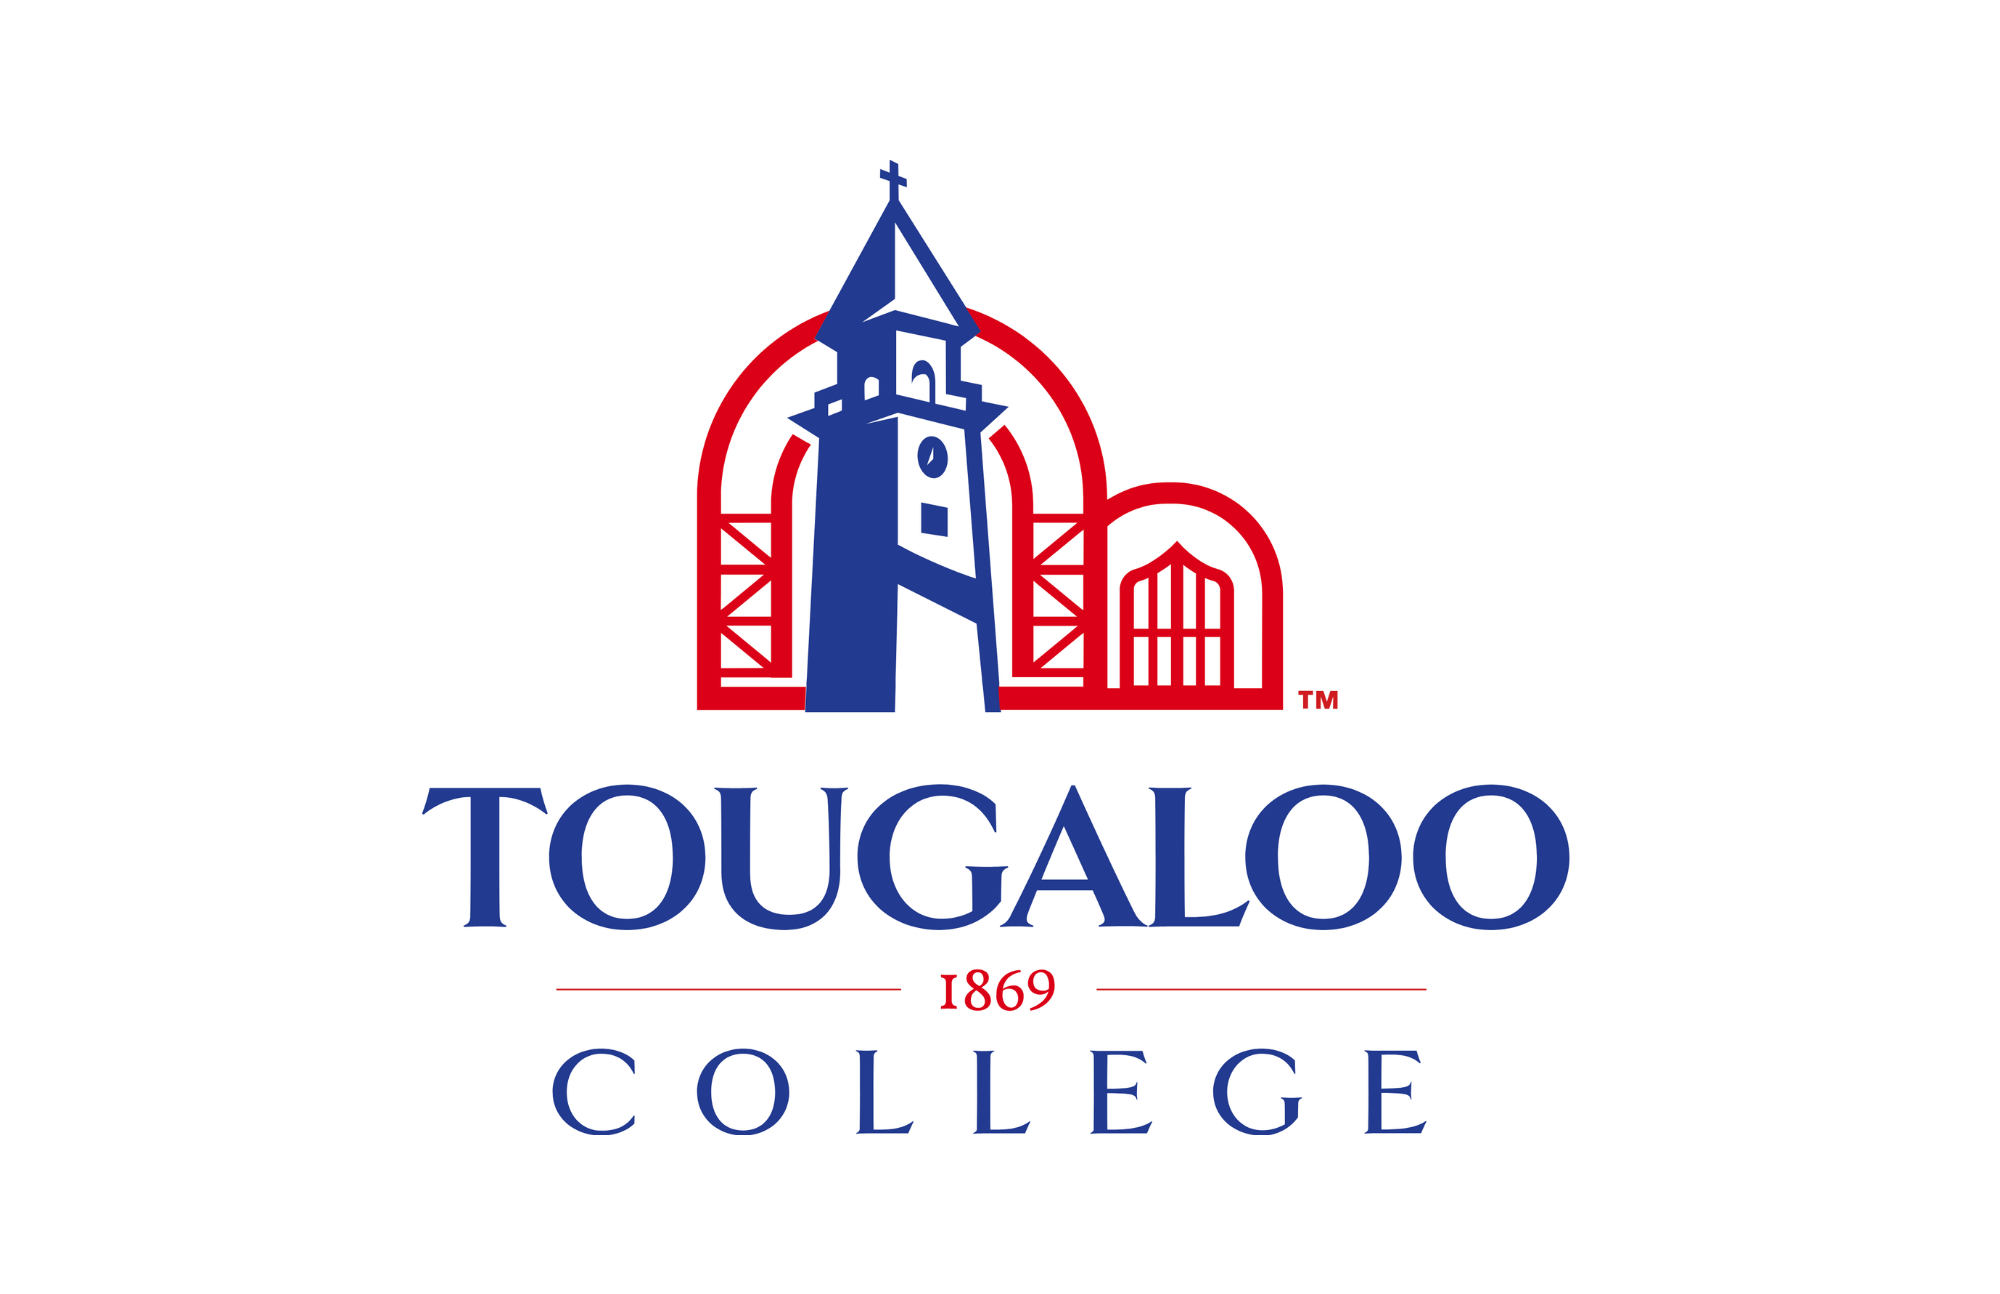 Tougaloo College Emblem in red and blue.